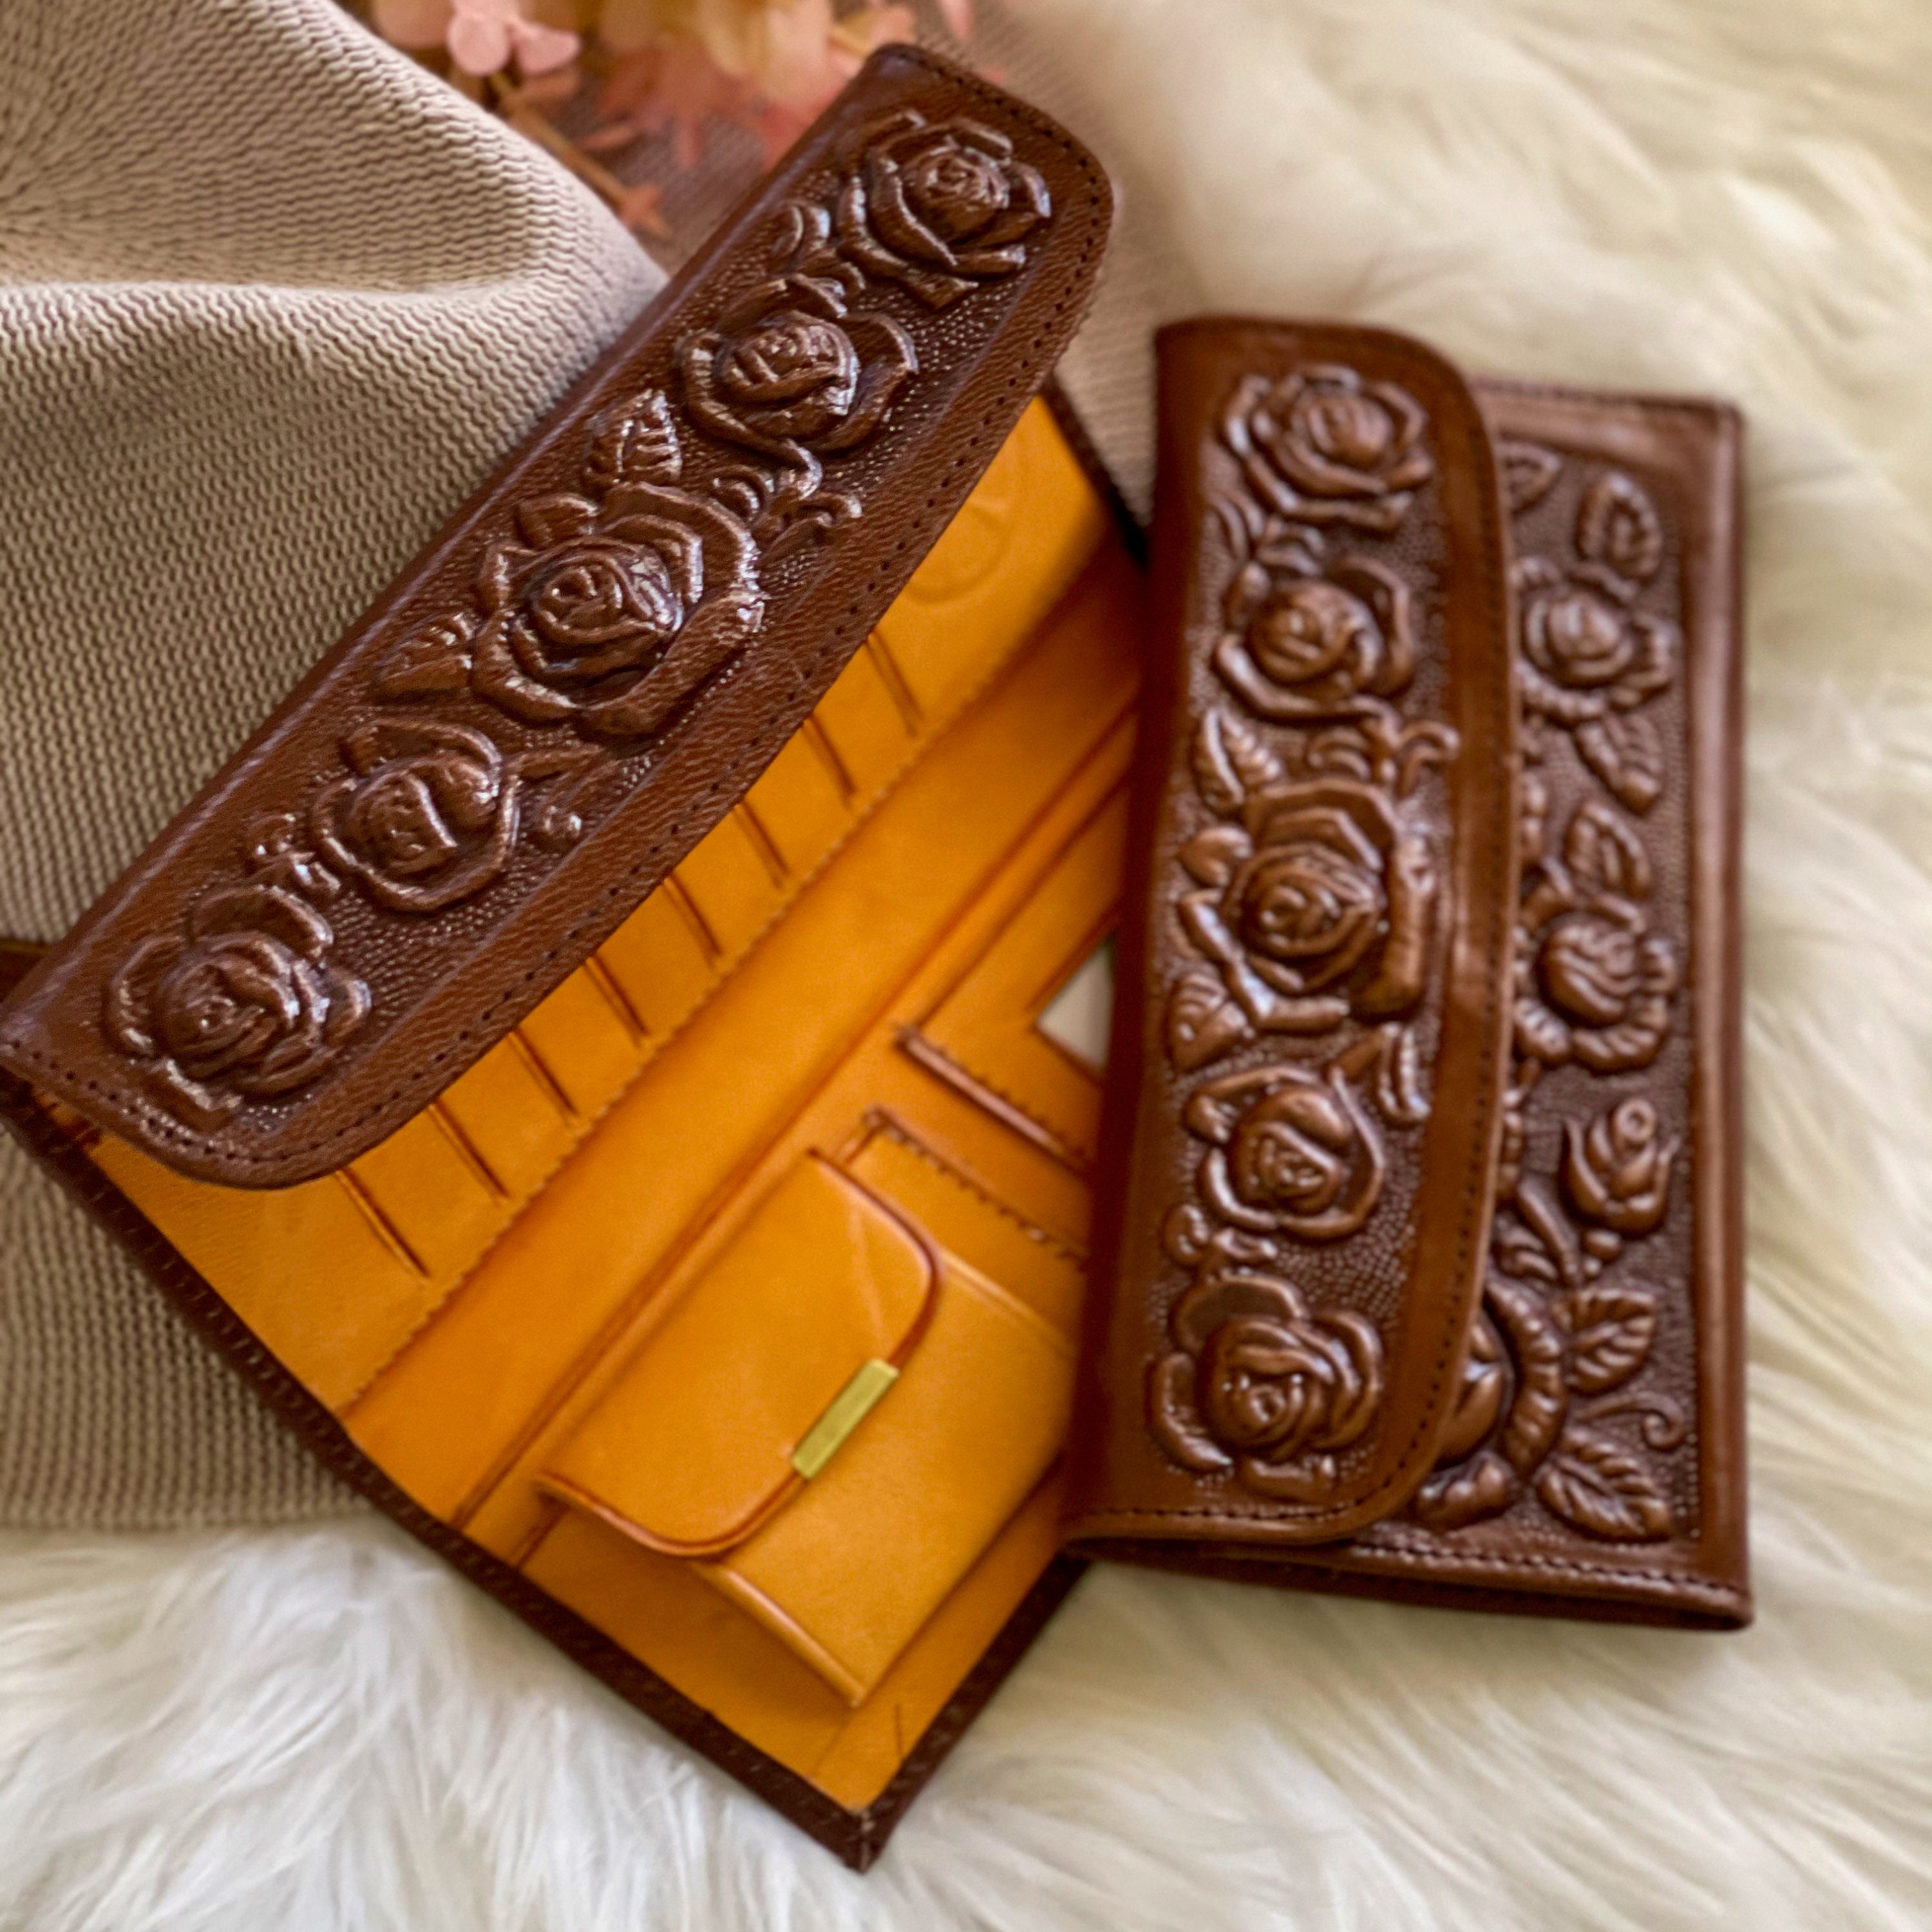 Embossed Empress Collection Wallet with coin pocket